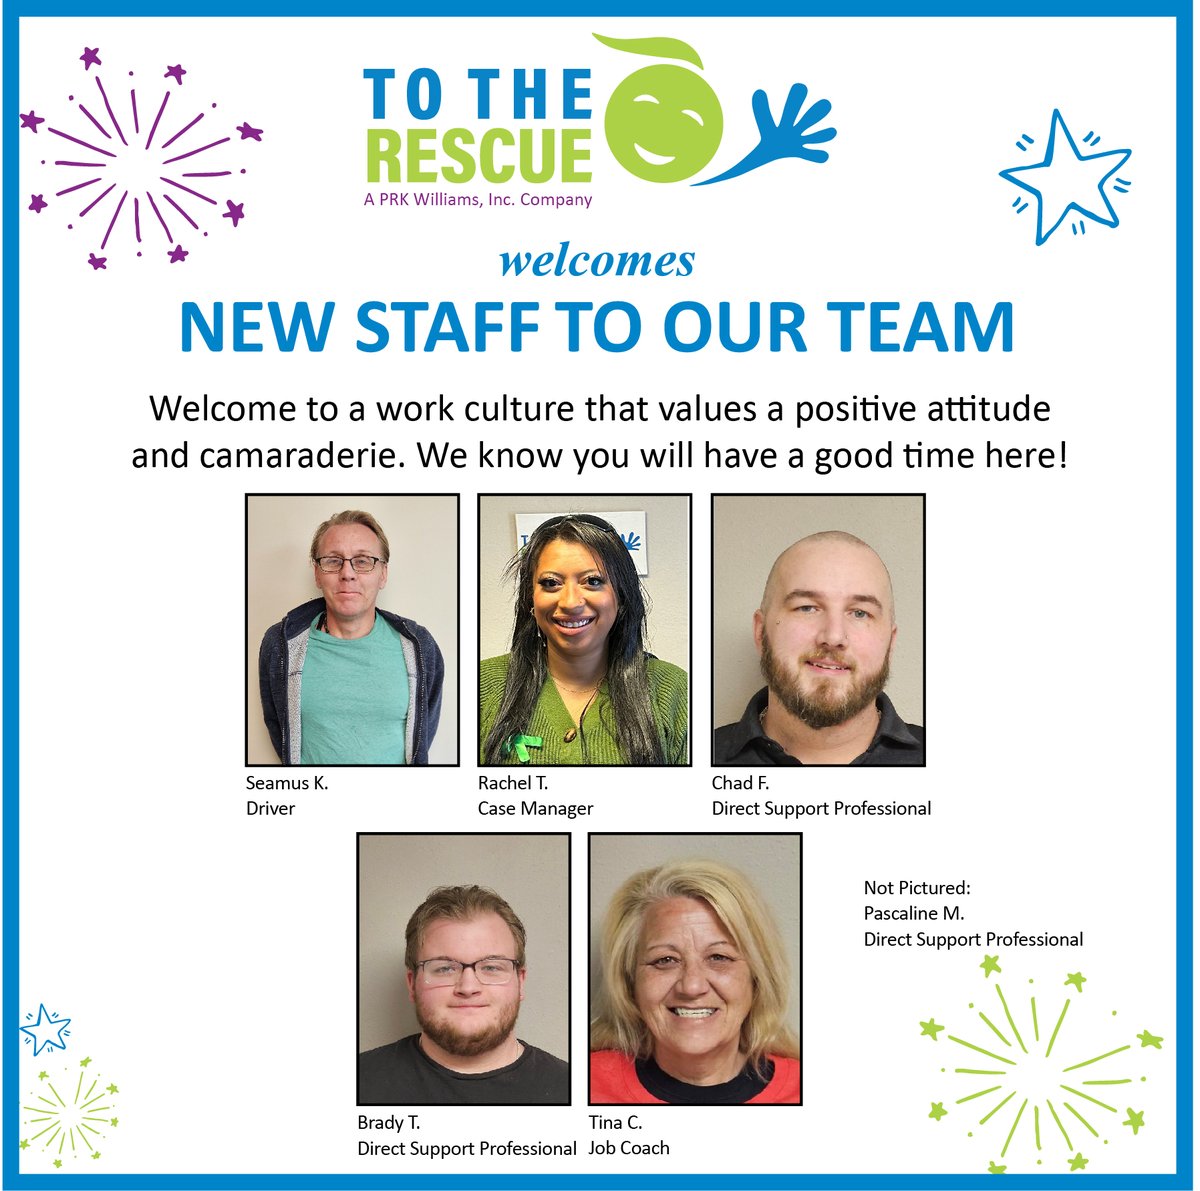 Welcome New To The Rescue Staff! Welcome to a work culture that values a positive attitude and camaraderie. Welcome to a team that helps improve people's lives everyday.  #Welcomenewstaff #totherescue